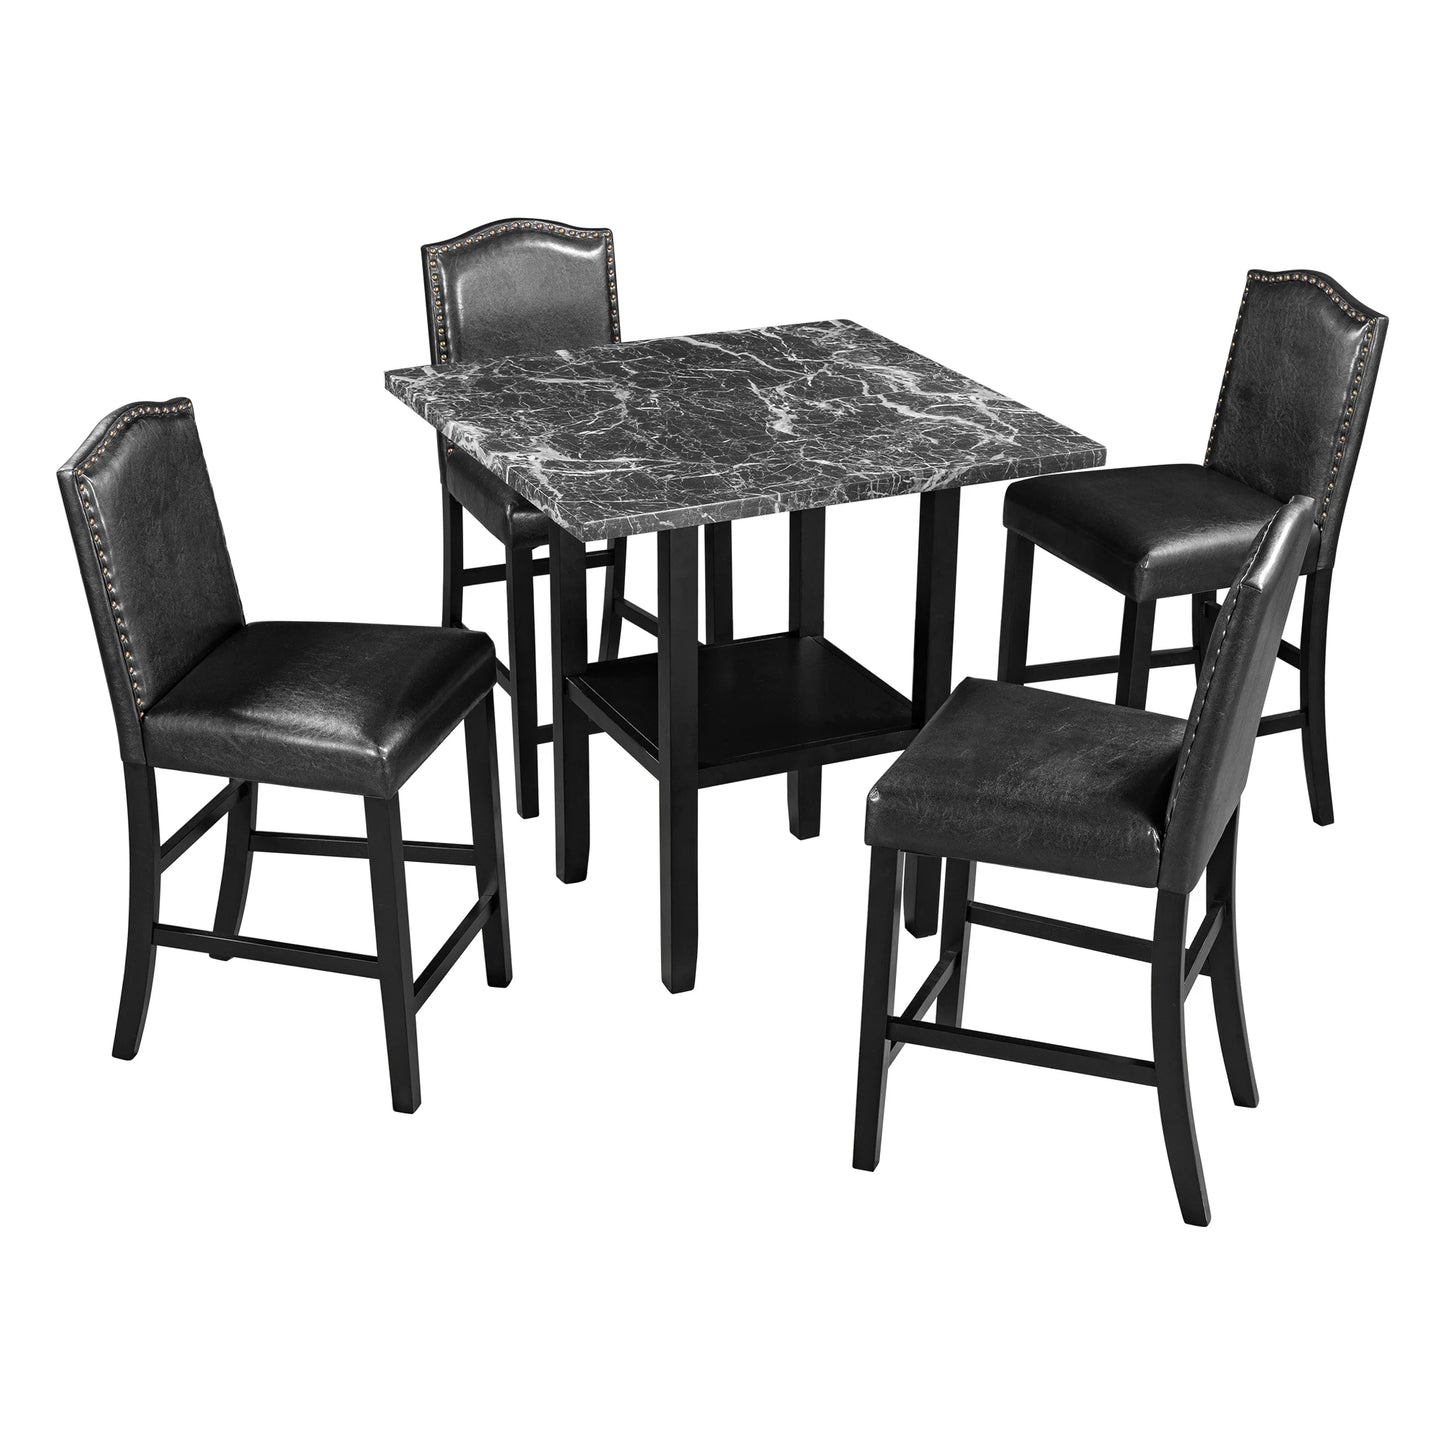 5-Piece Dining Set with Coordinated Chairs